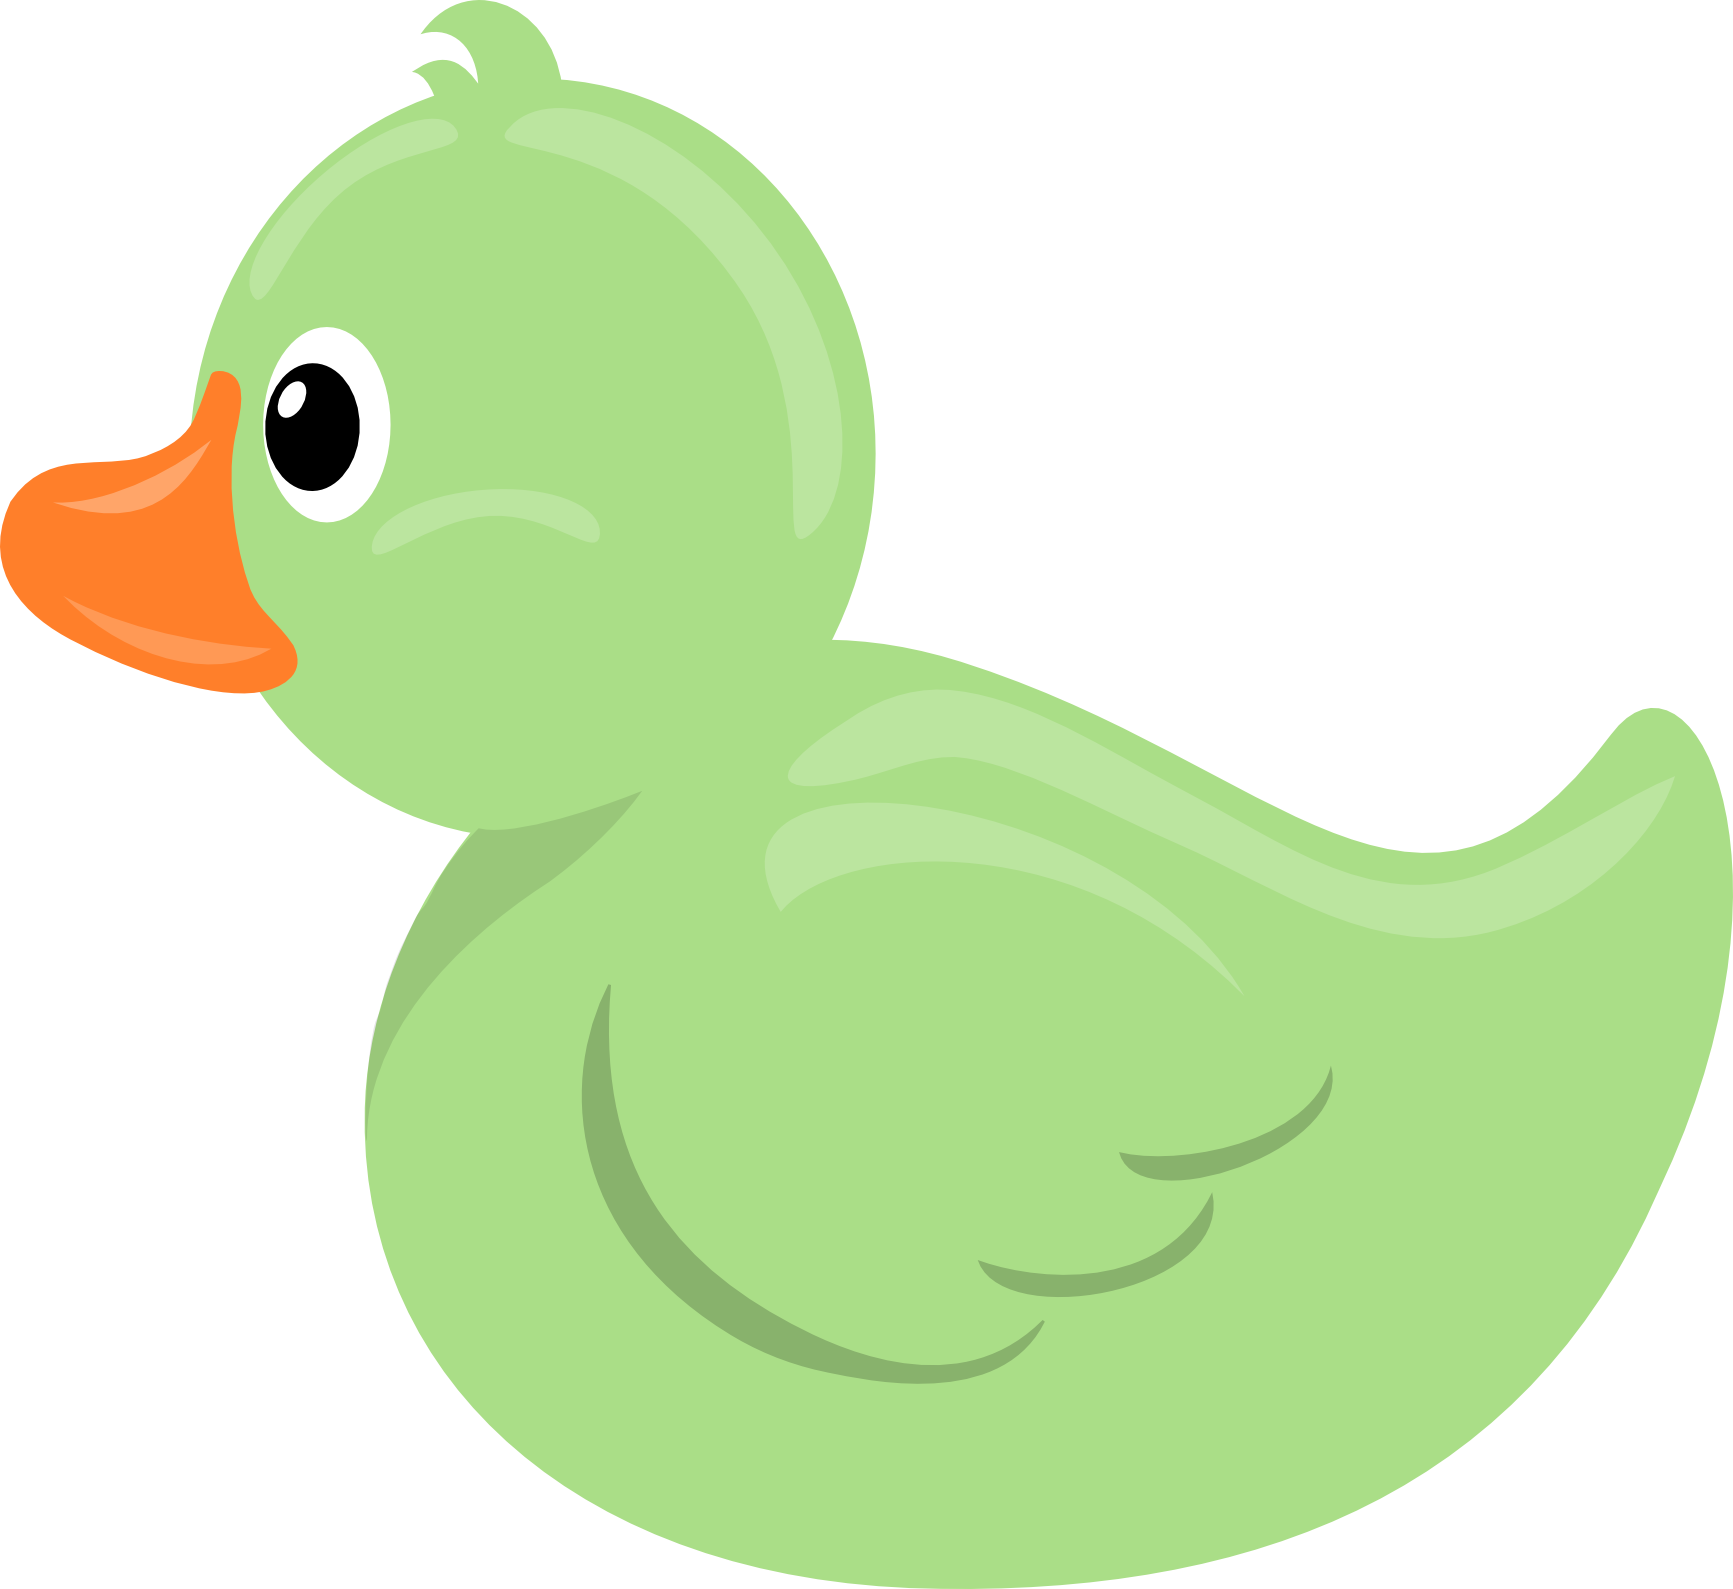  collection of green. Ducks clipart cute